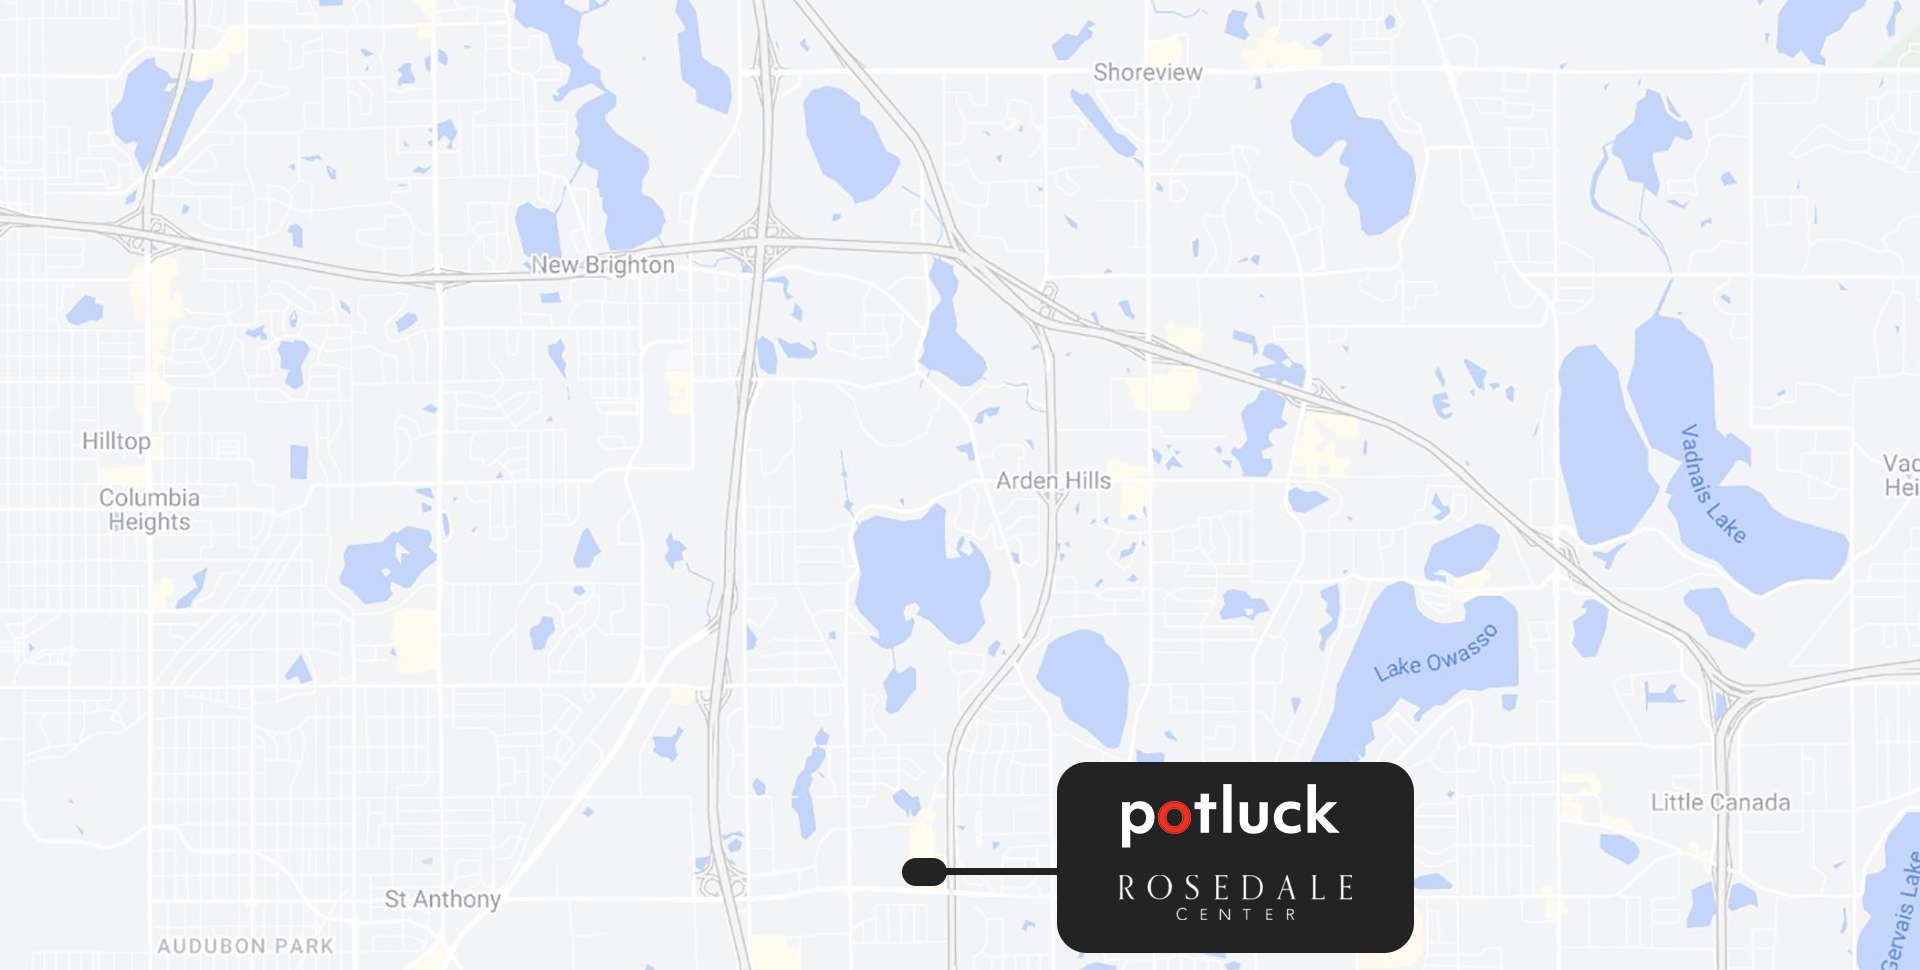 Hotels near Potluck and Rosedale Center